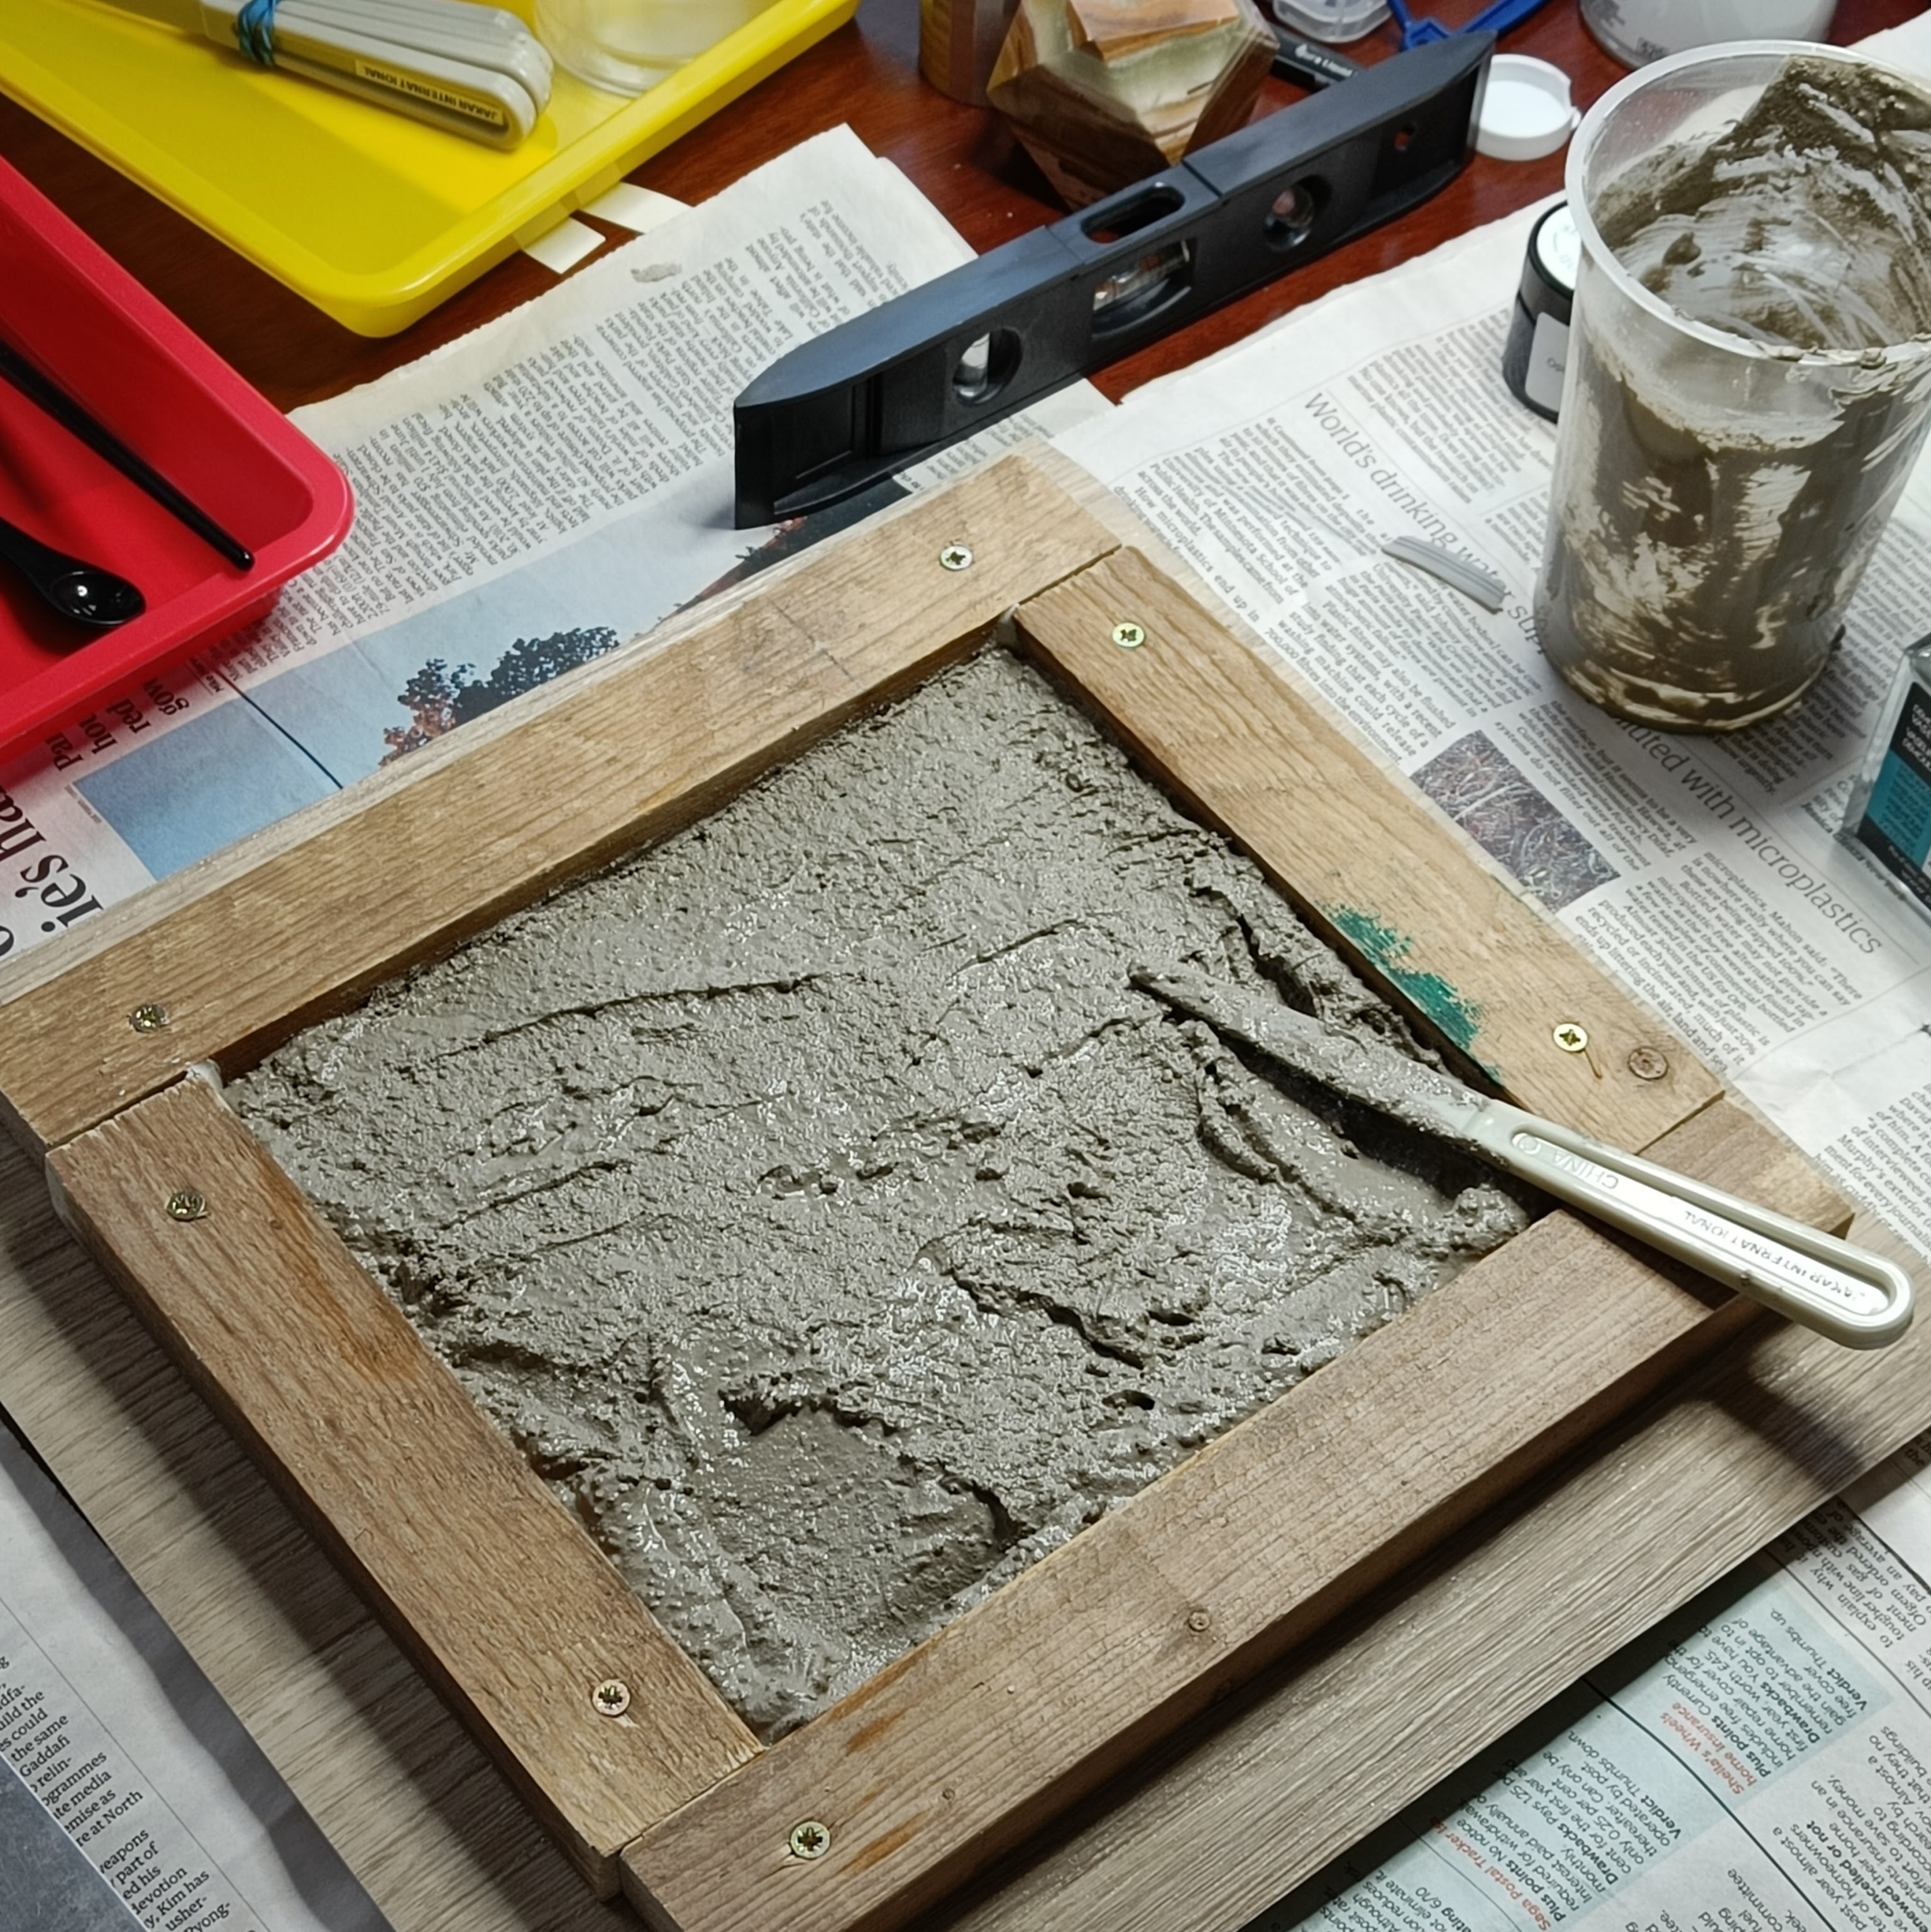 the mixed concrete has been poured and scraped into the
  frame, and roughly levelled with the entirely inadequate
  plastic palette knife meant for inking